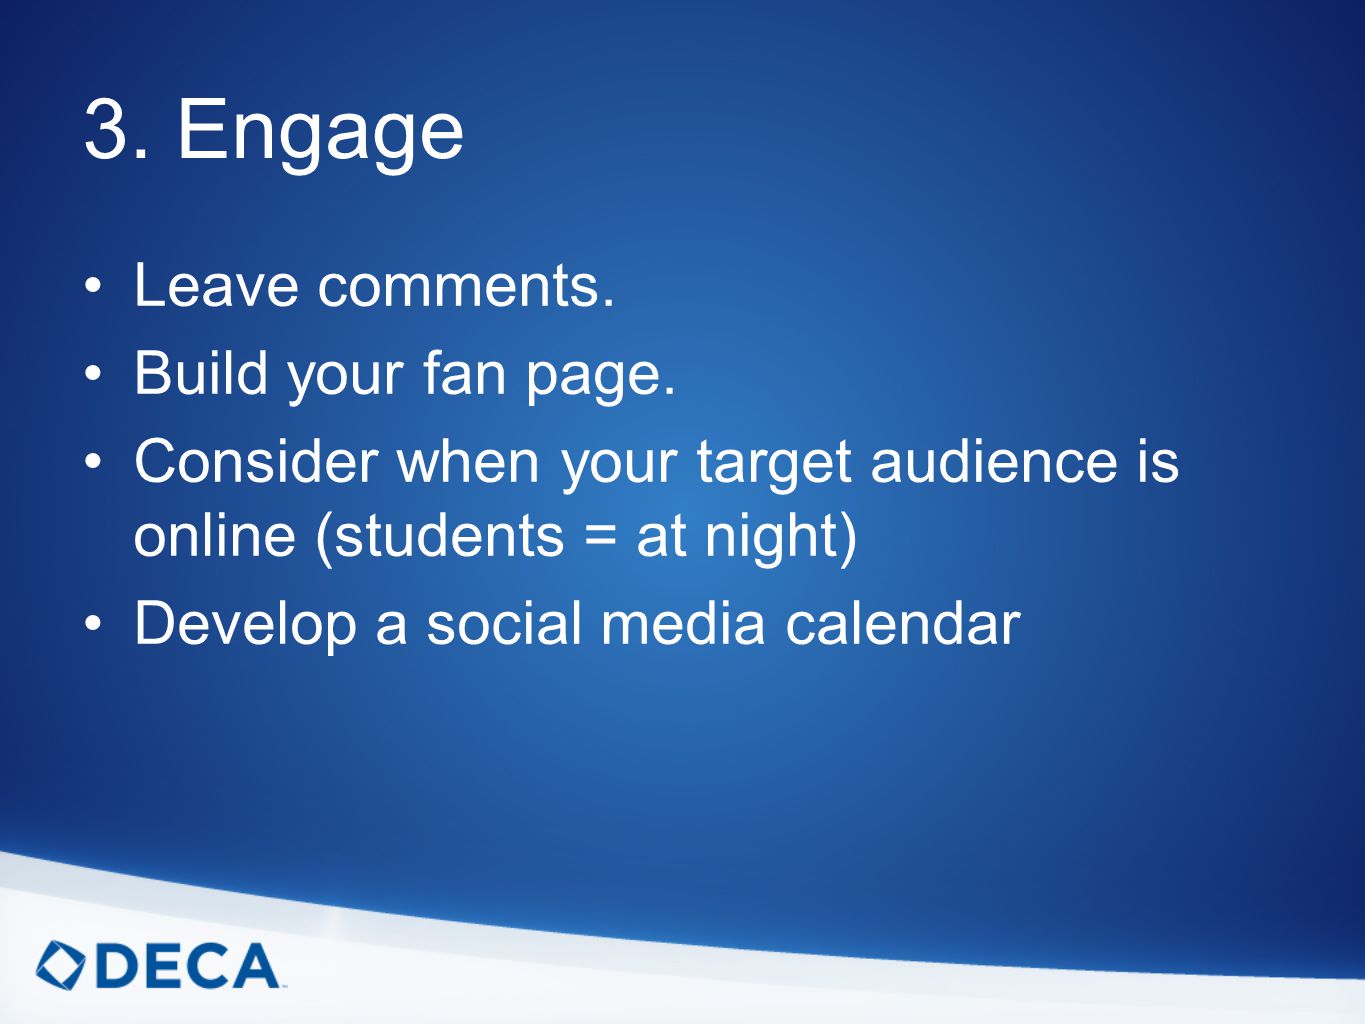 3. Engage Leave comments. Build your fan page.